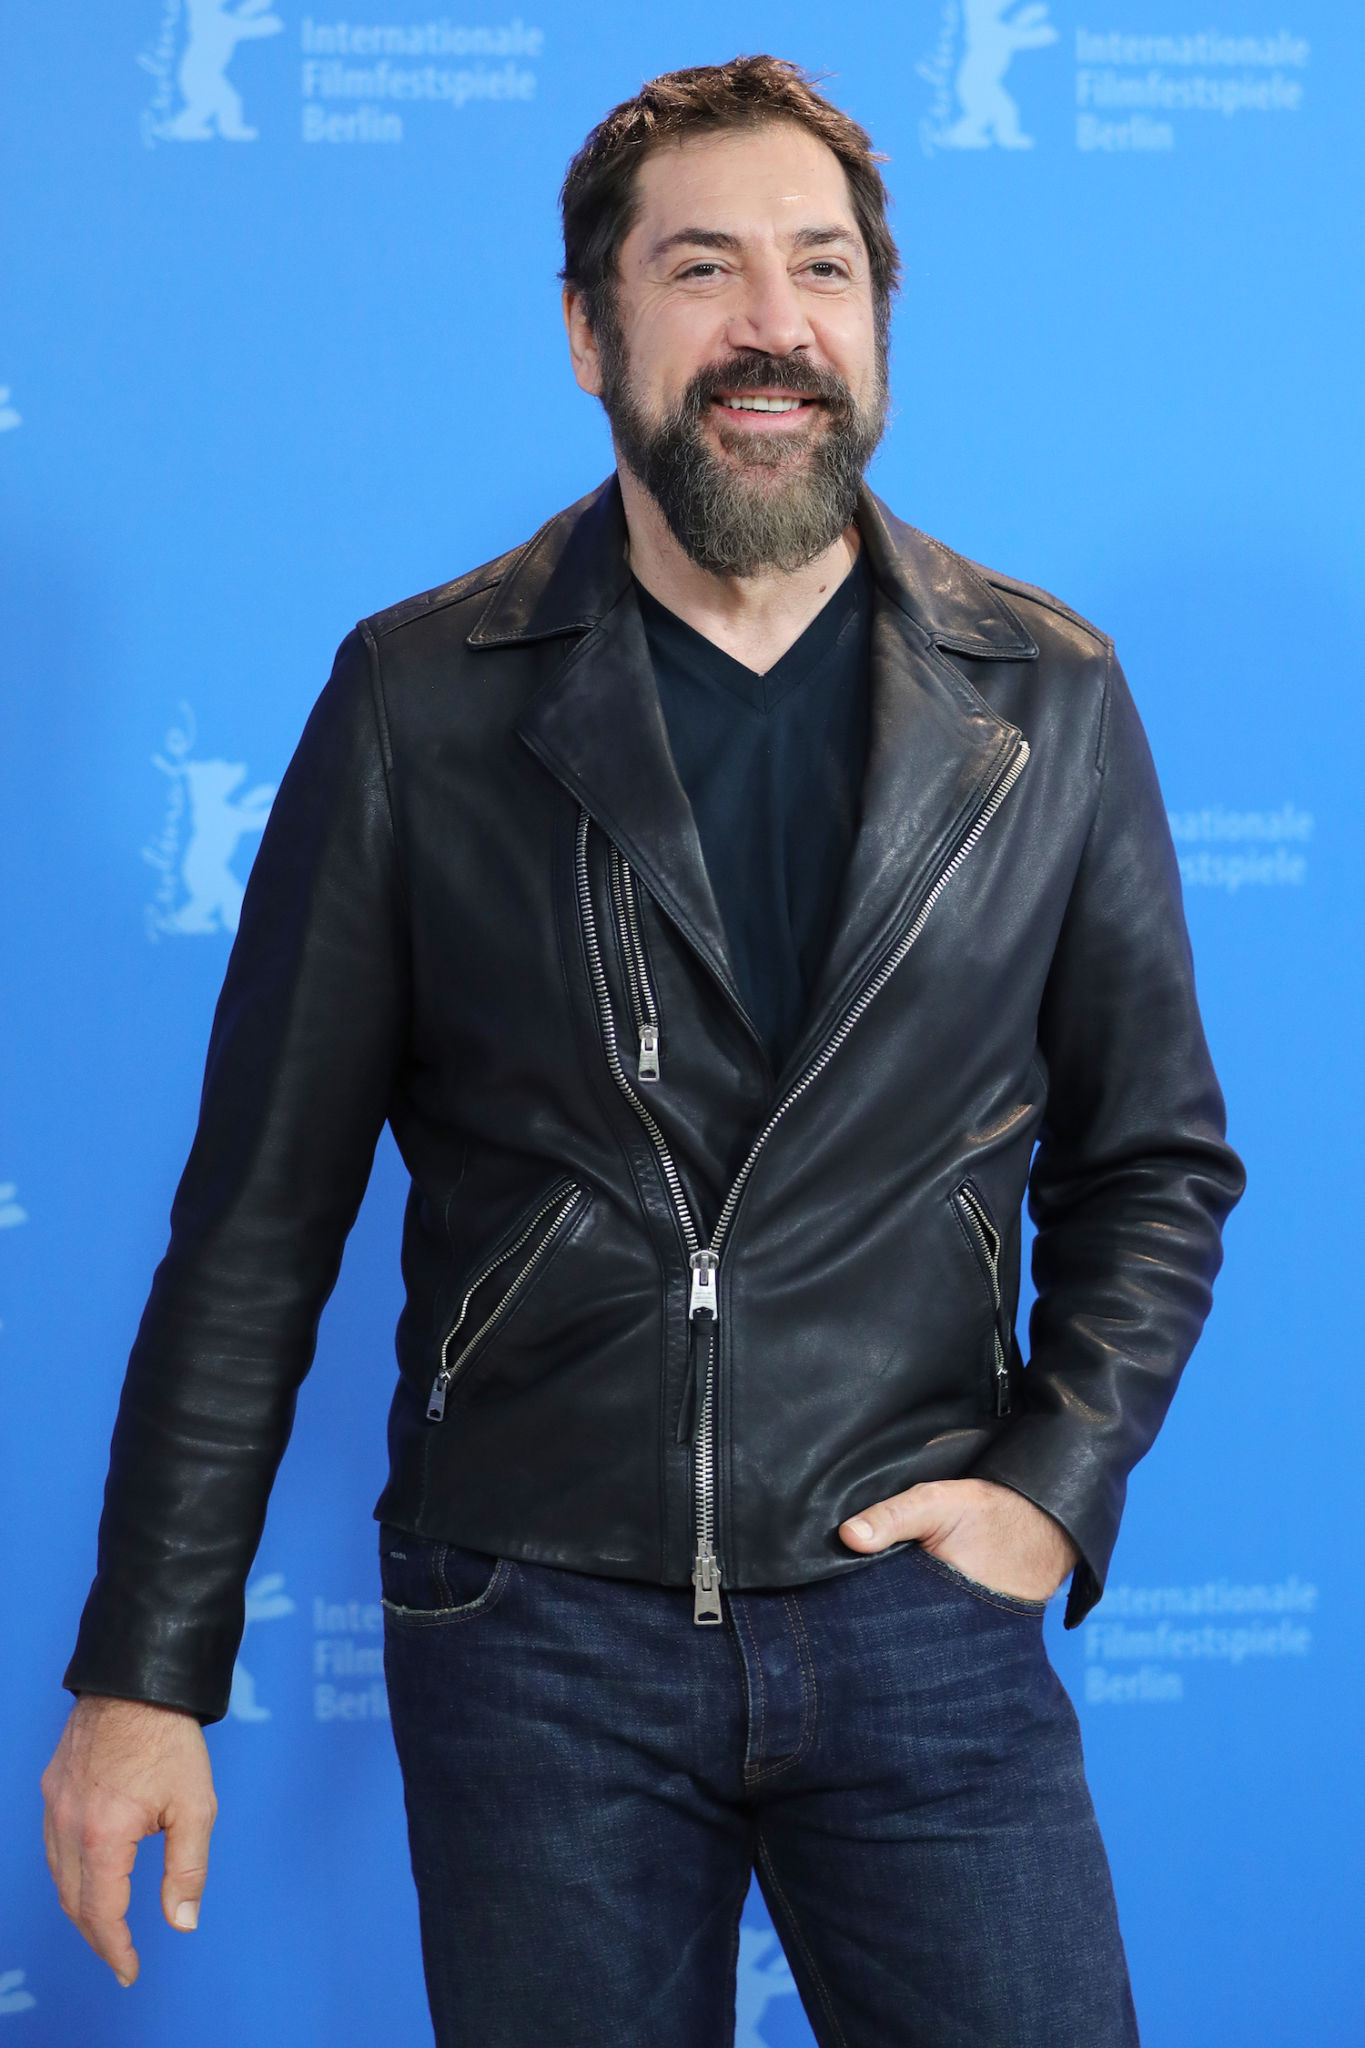 Javier Bardem at a 'The Roads Not Taken' photo call during the 70th Berlinale International Film Festival Berlin